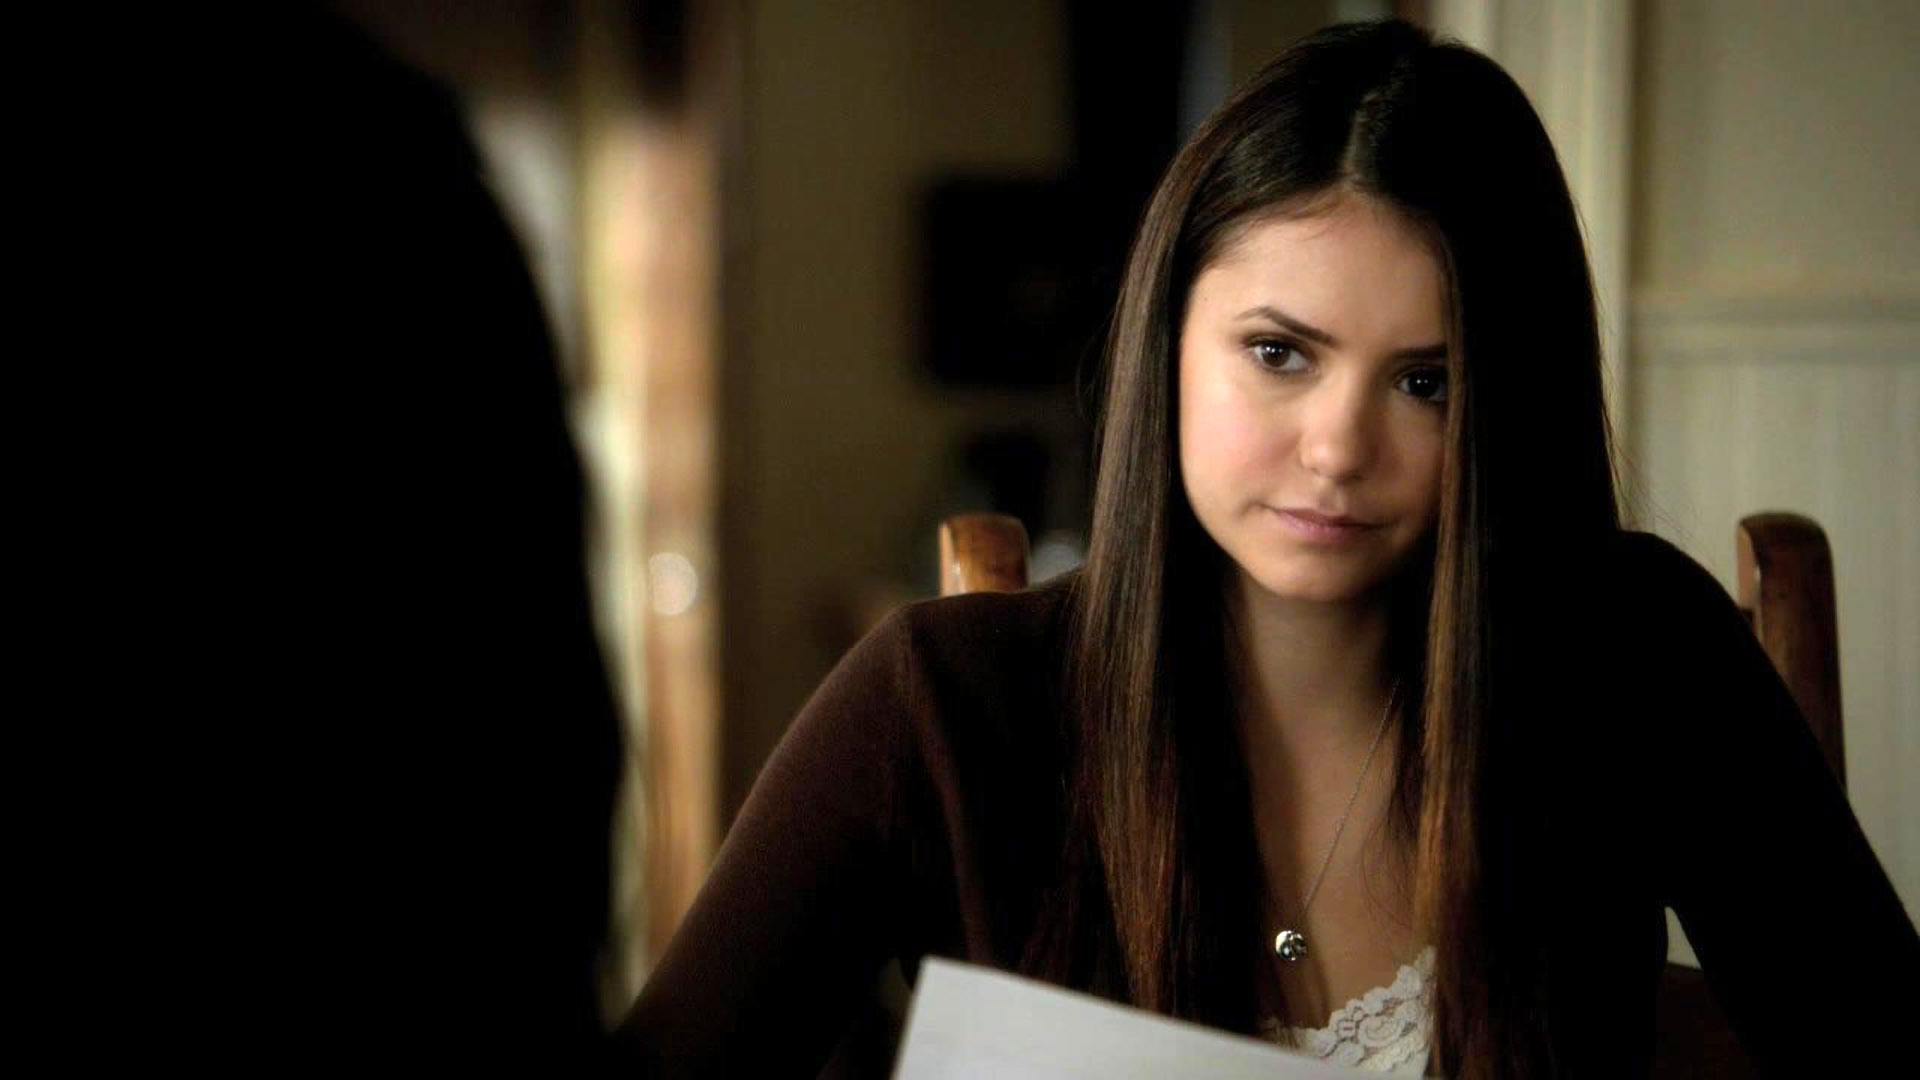 Vampire Diaries Plot Hole Was Too Convenient (Enough to Call It Lazy Writing)